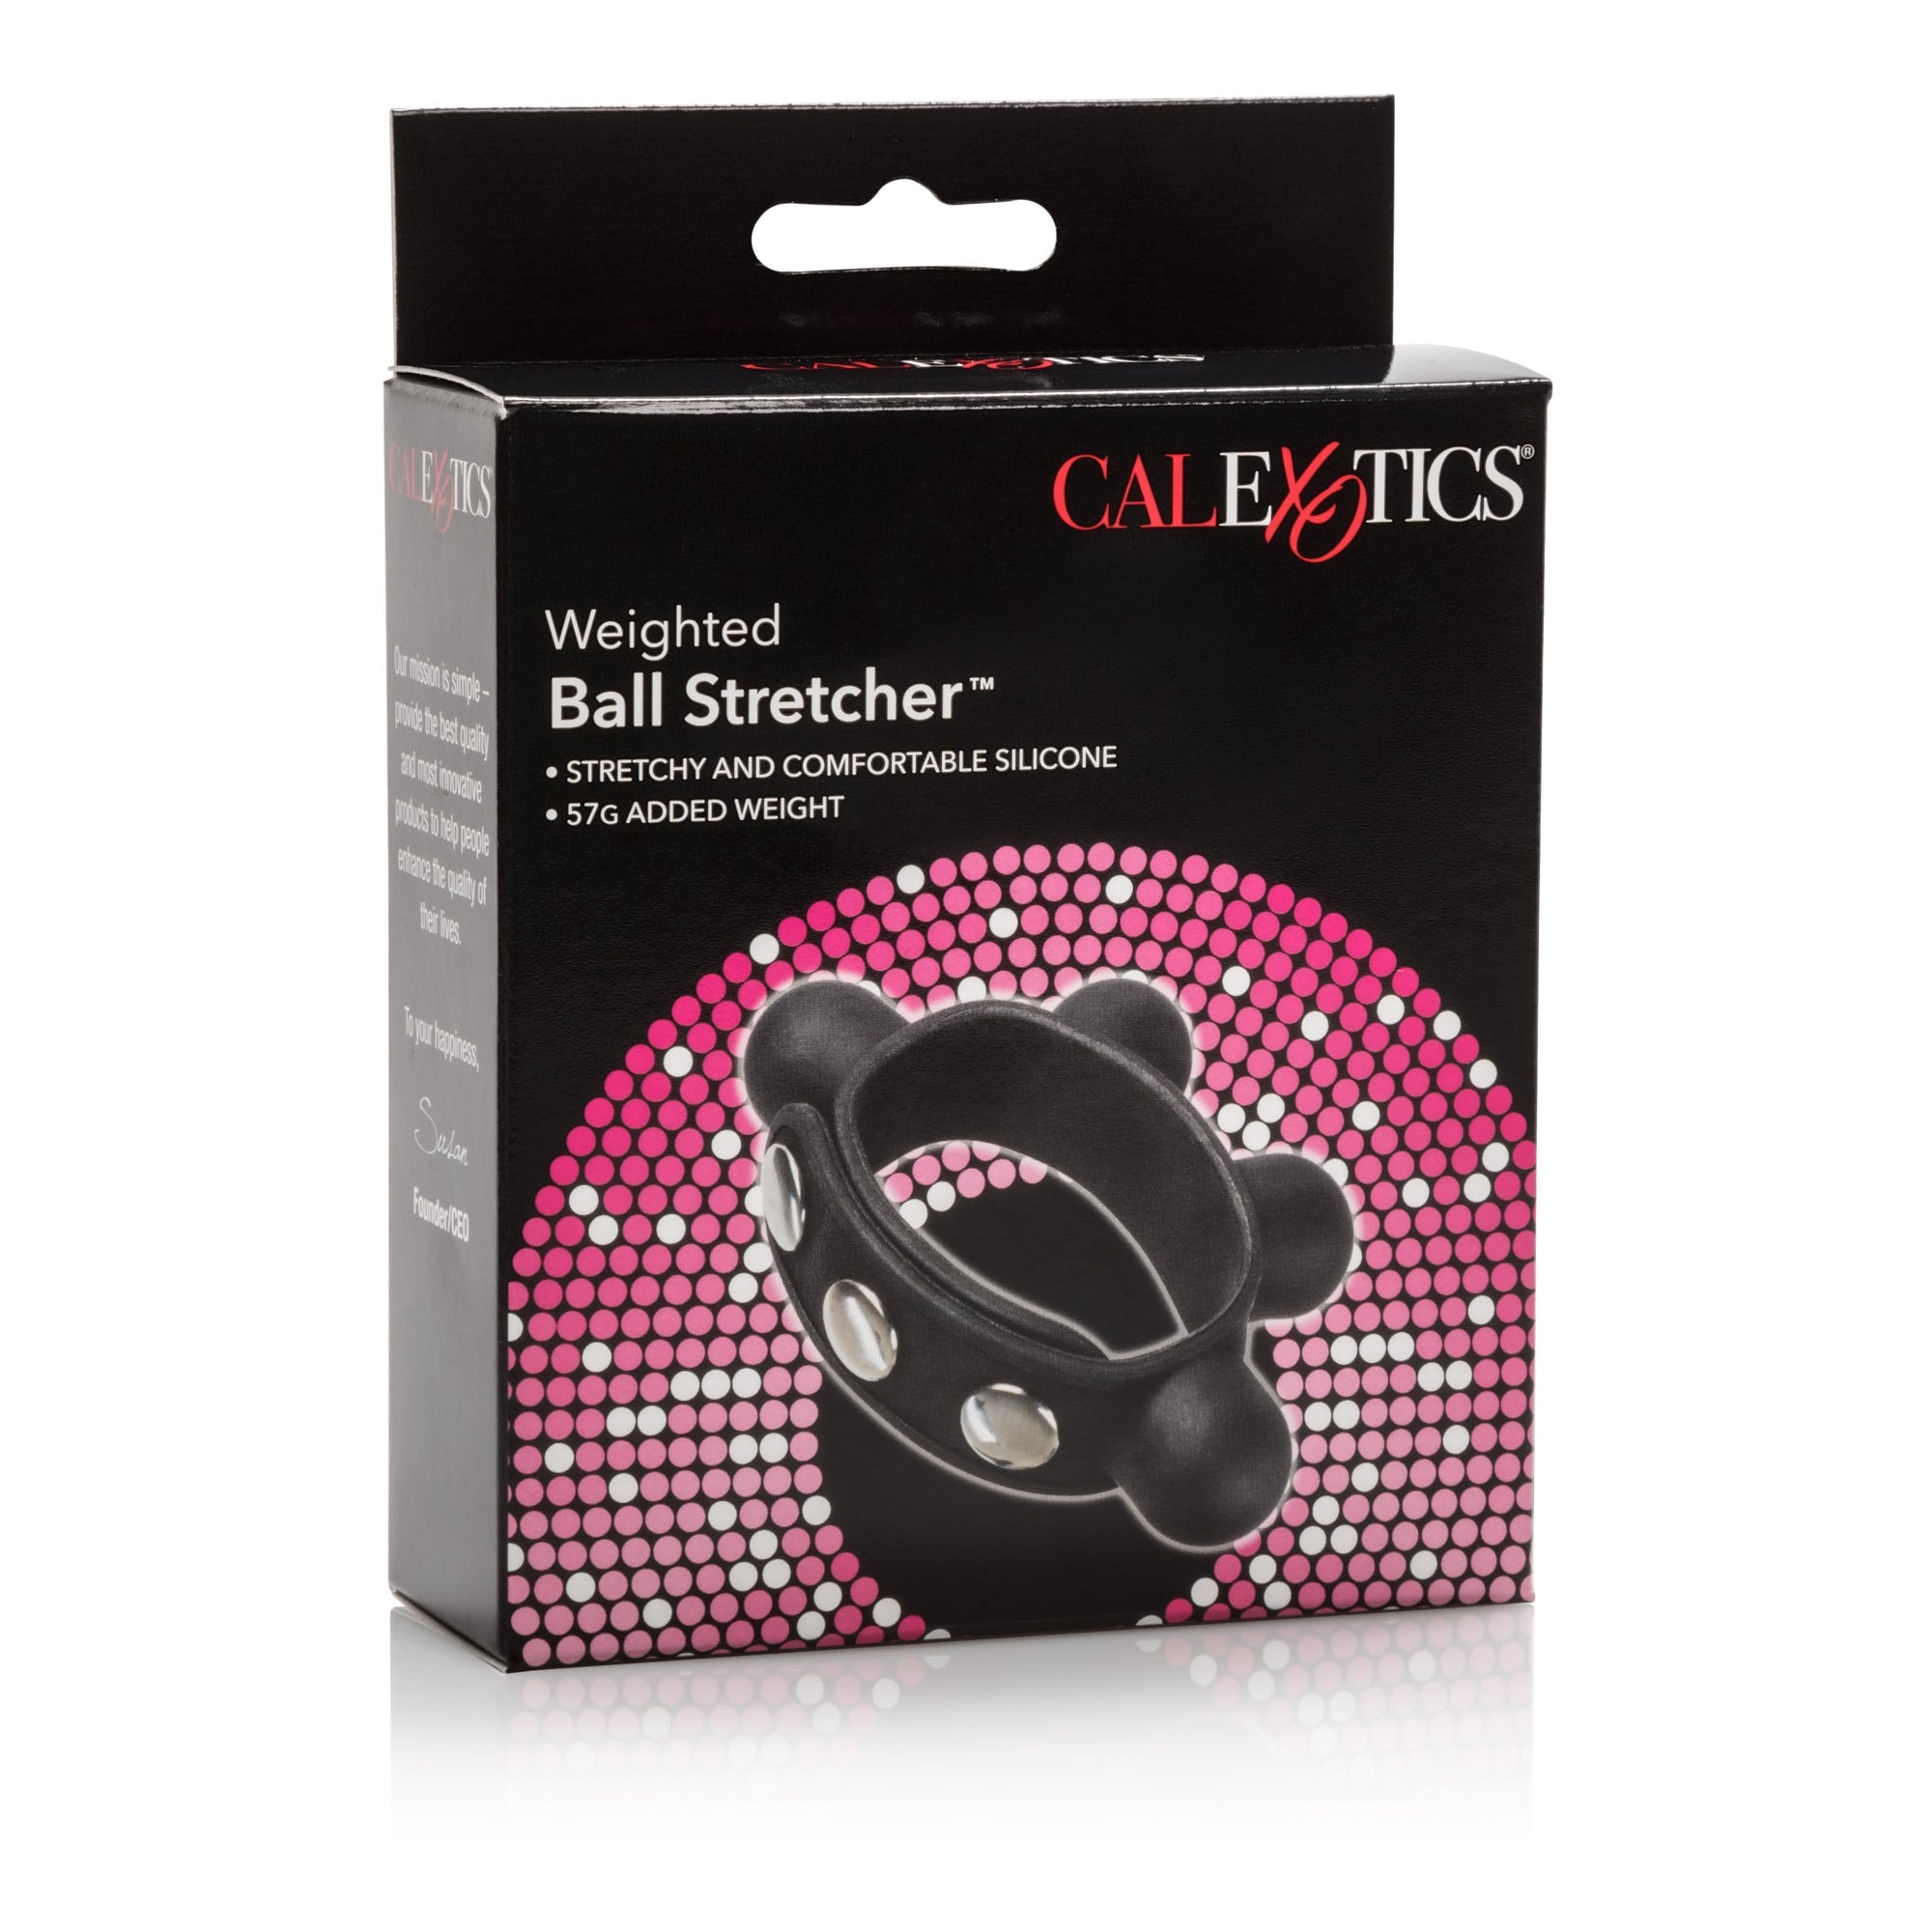 California Exotics - Weighted Ball Stretcher Cock Ring (Black) Silicone Cock Ring (Non Vibration) Singapore